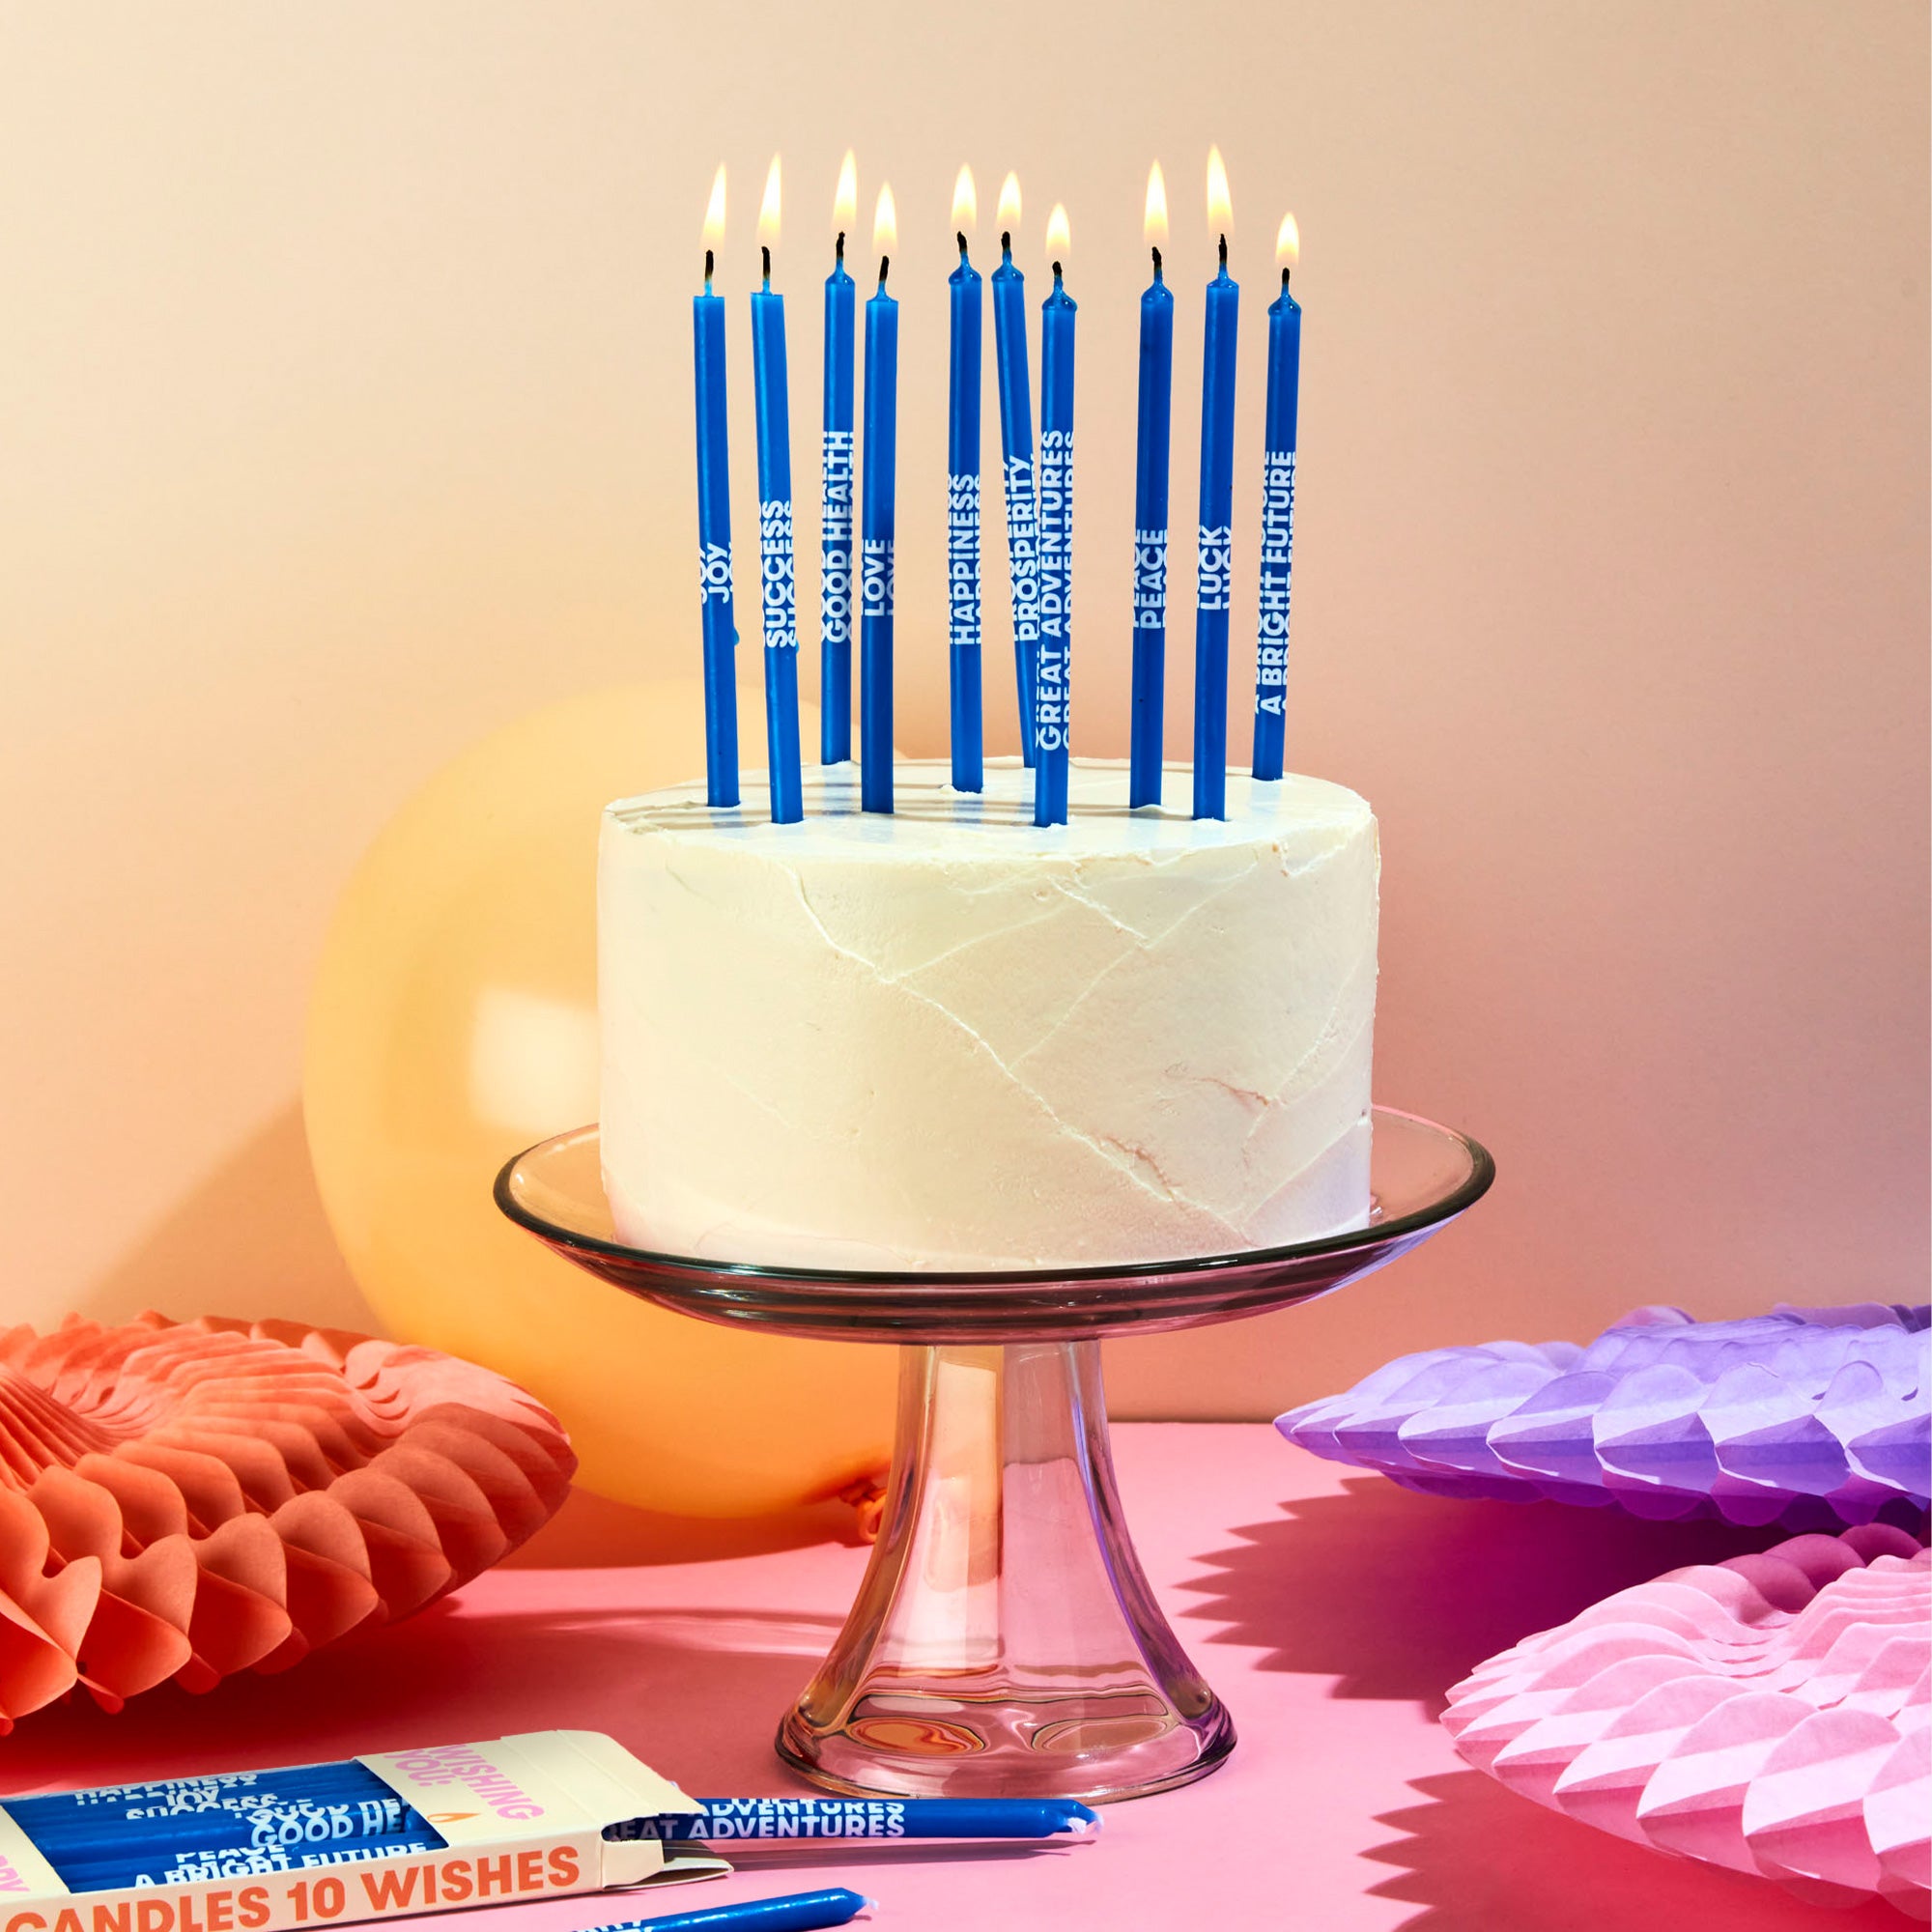 Wishing You: Birthday Candles - Blue